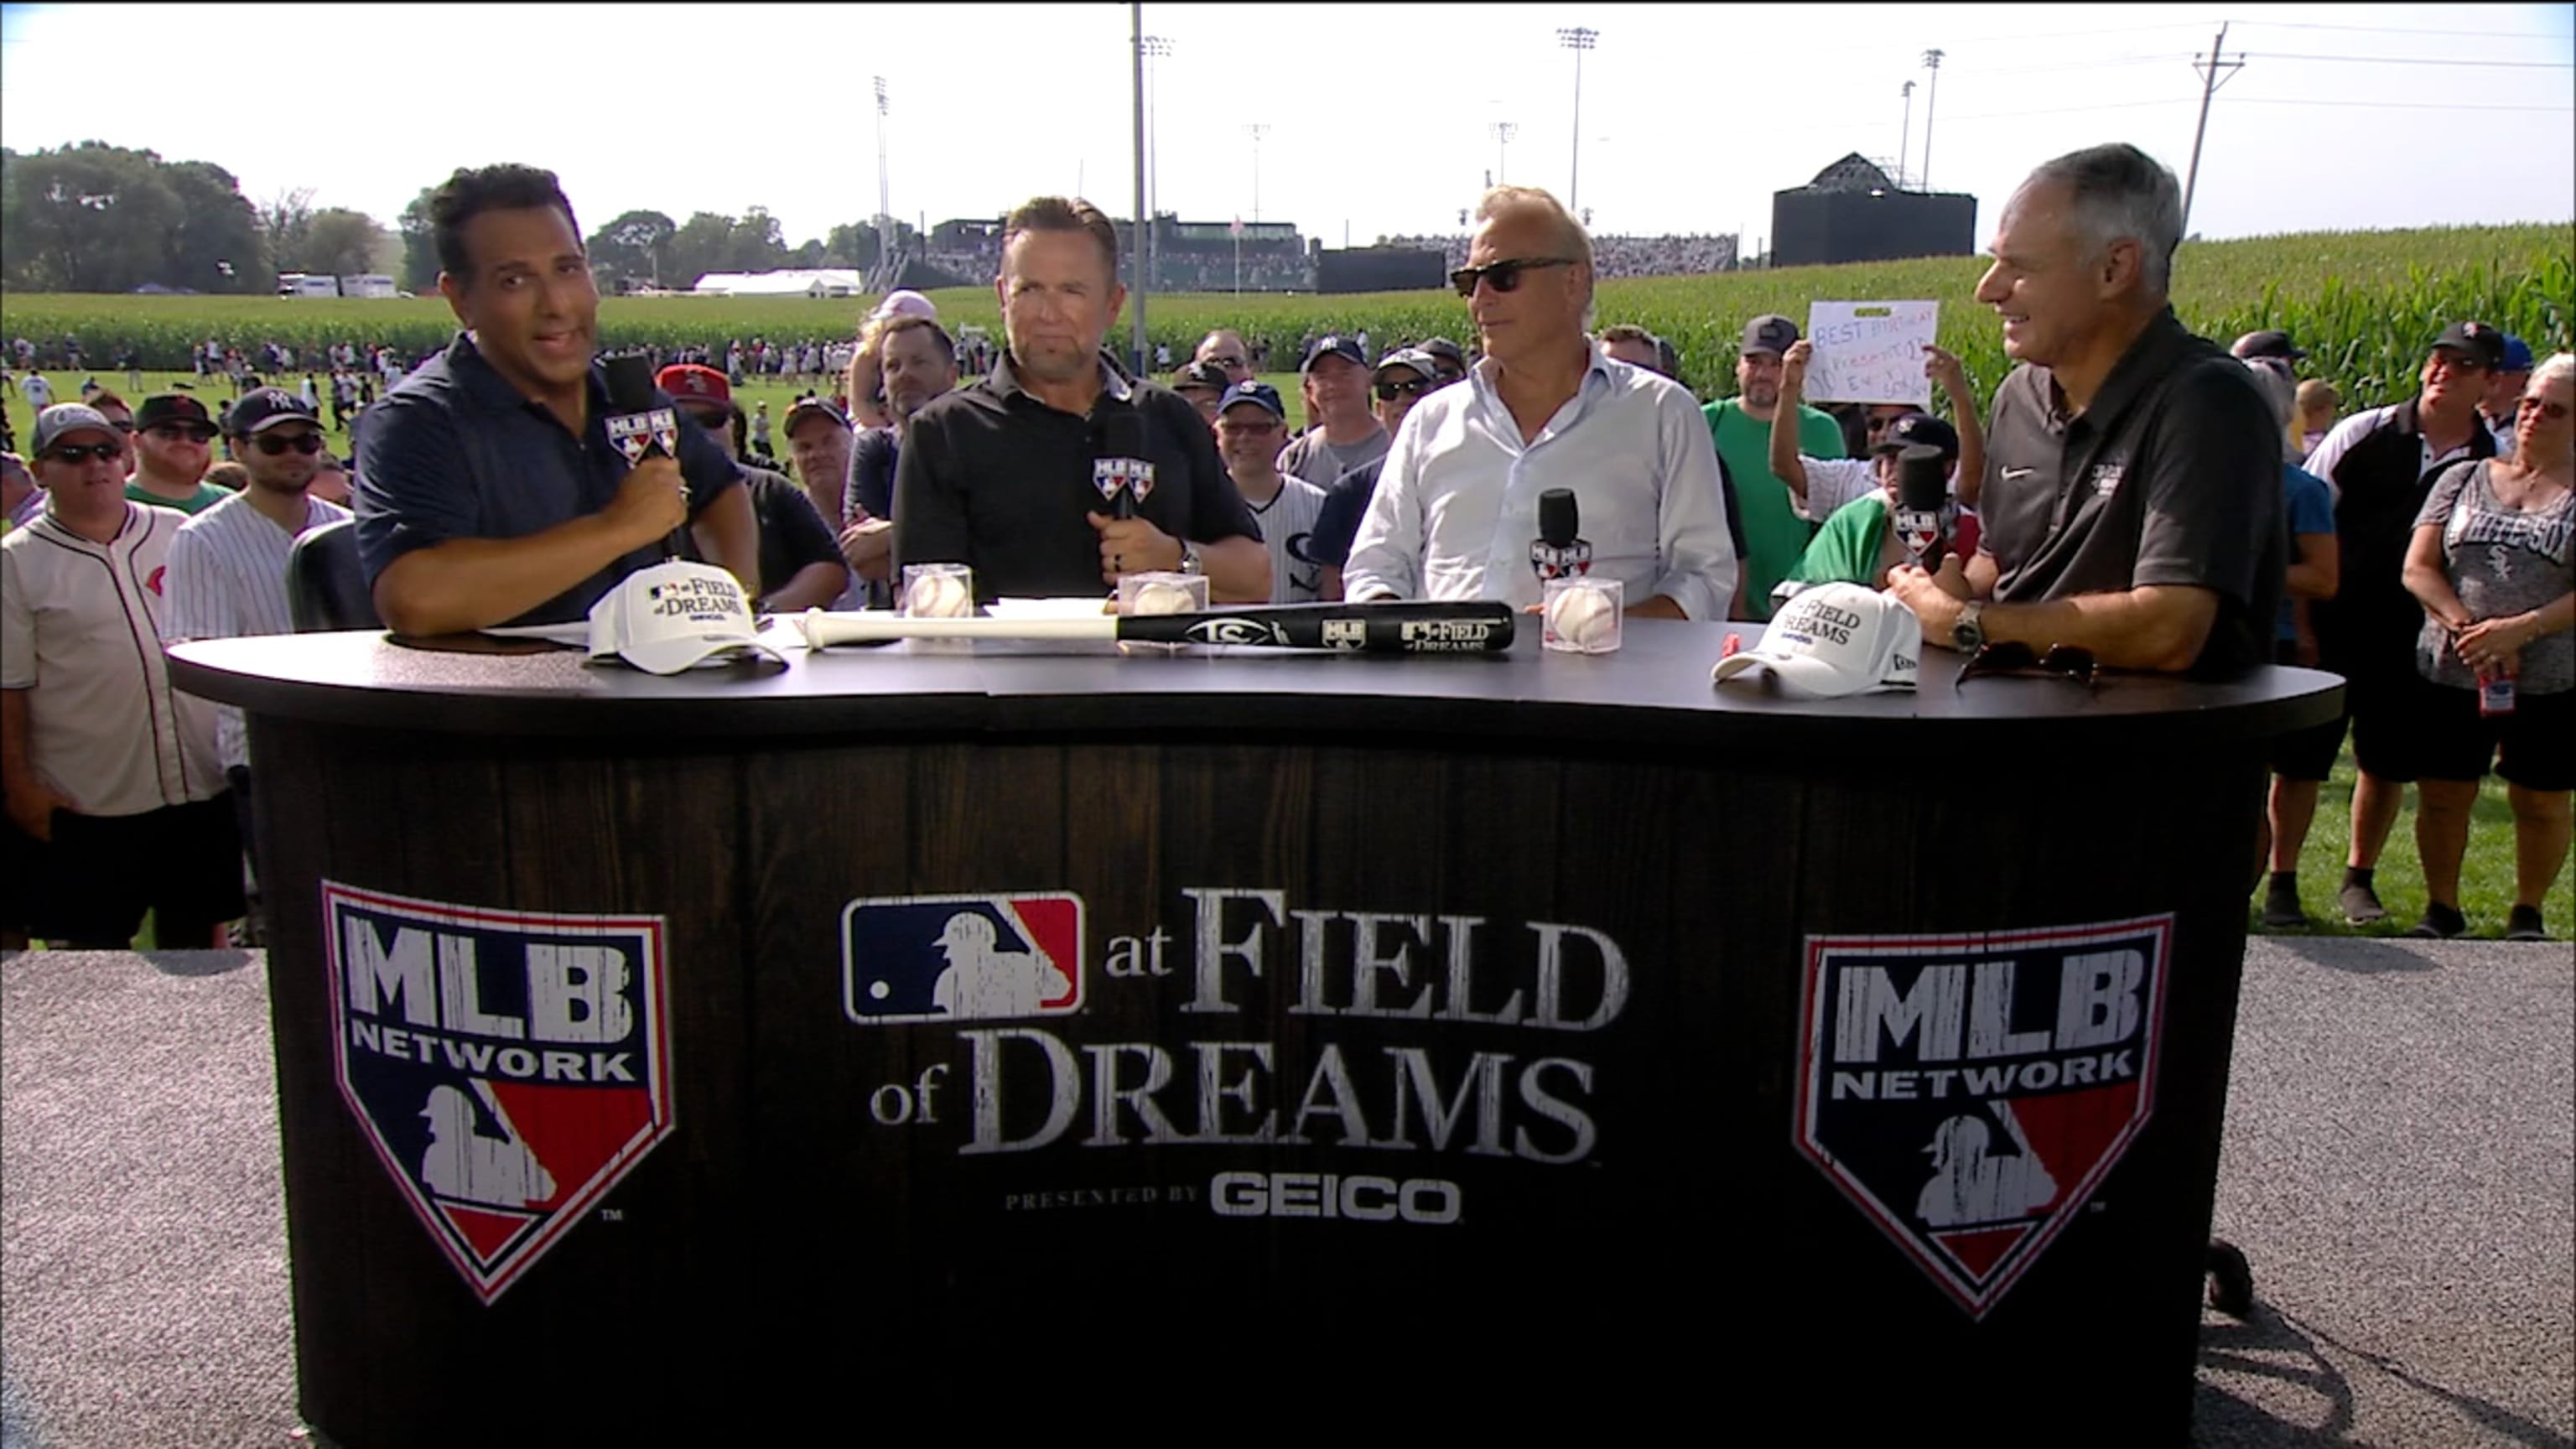 Field of Dreams game most-watched MLB regular season game since 2005